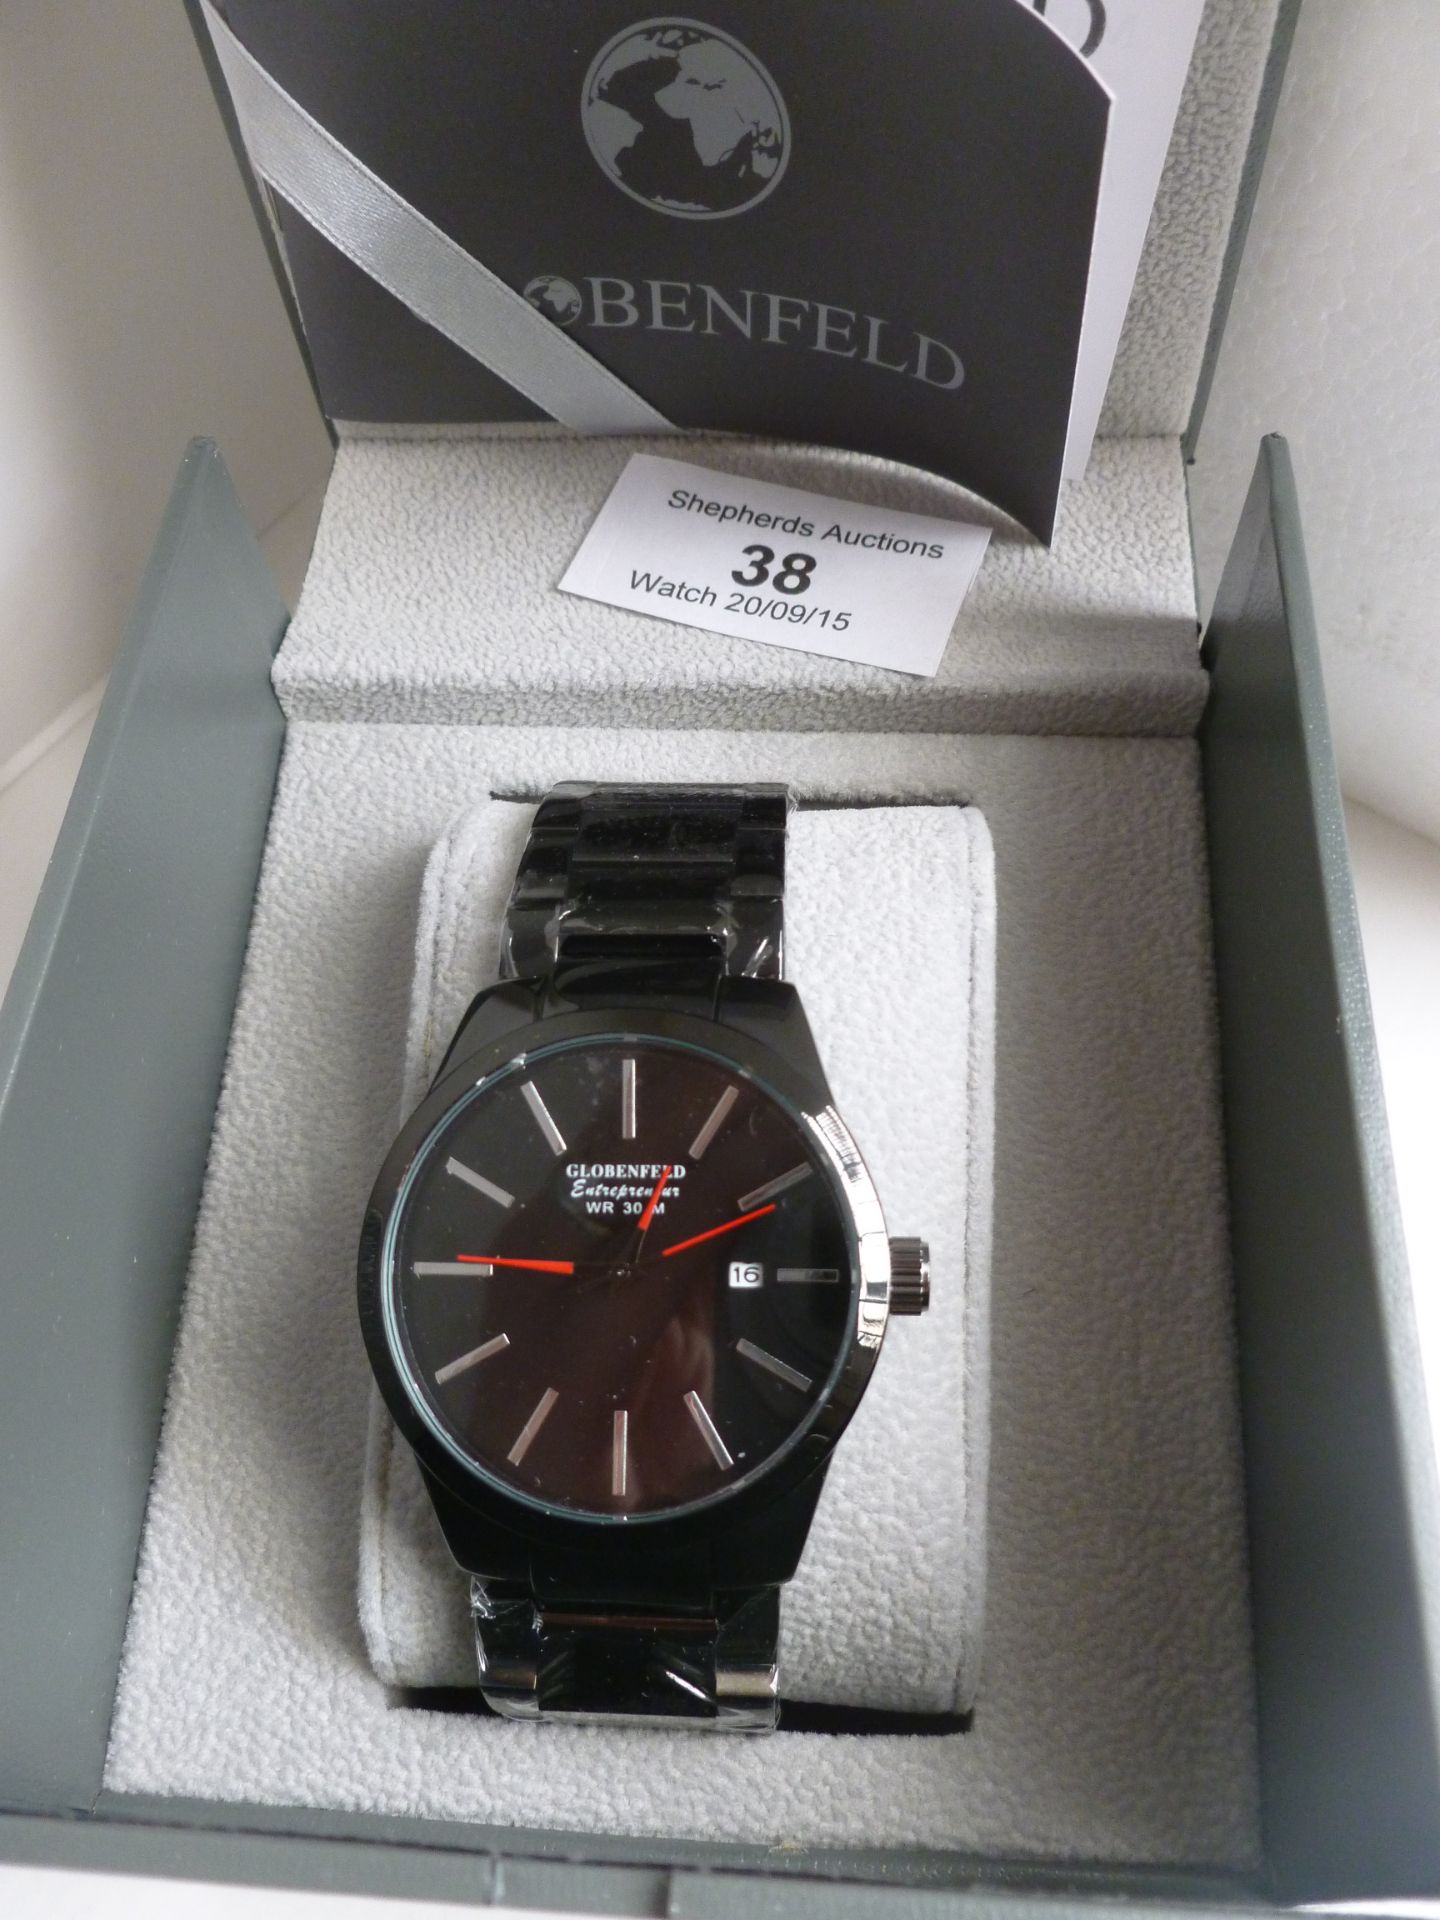 NO VAT!! Globenfeld limited edition Entrepreneur Mens Watch with high shine black strap and surround